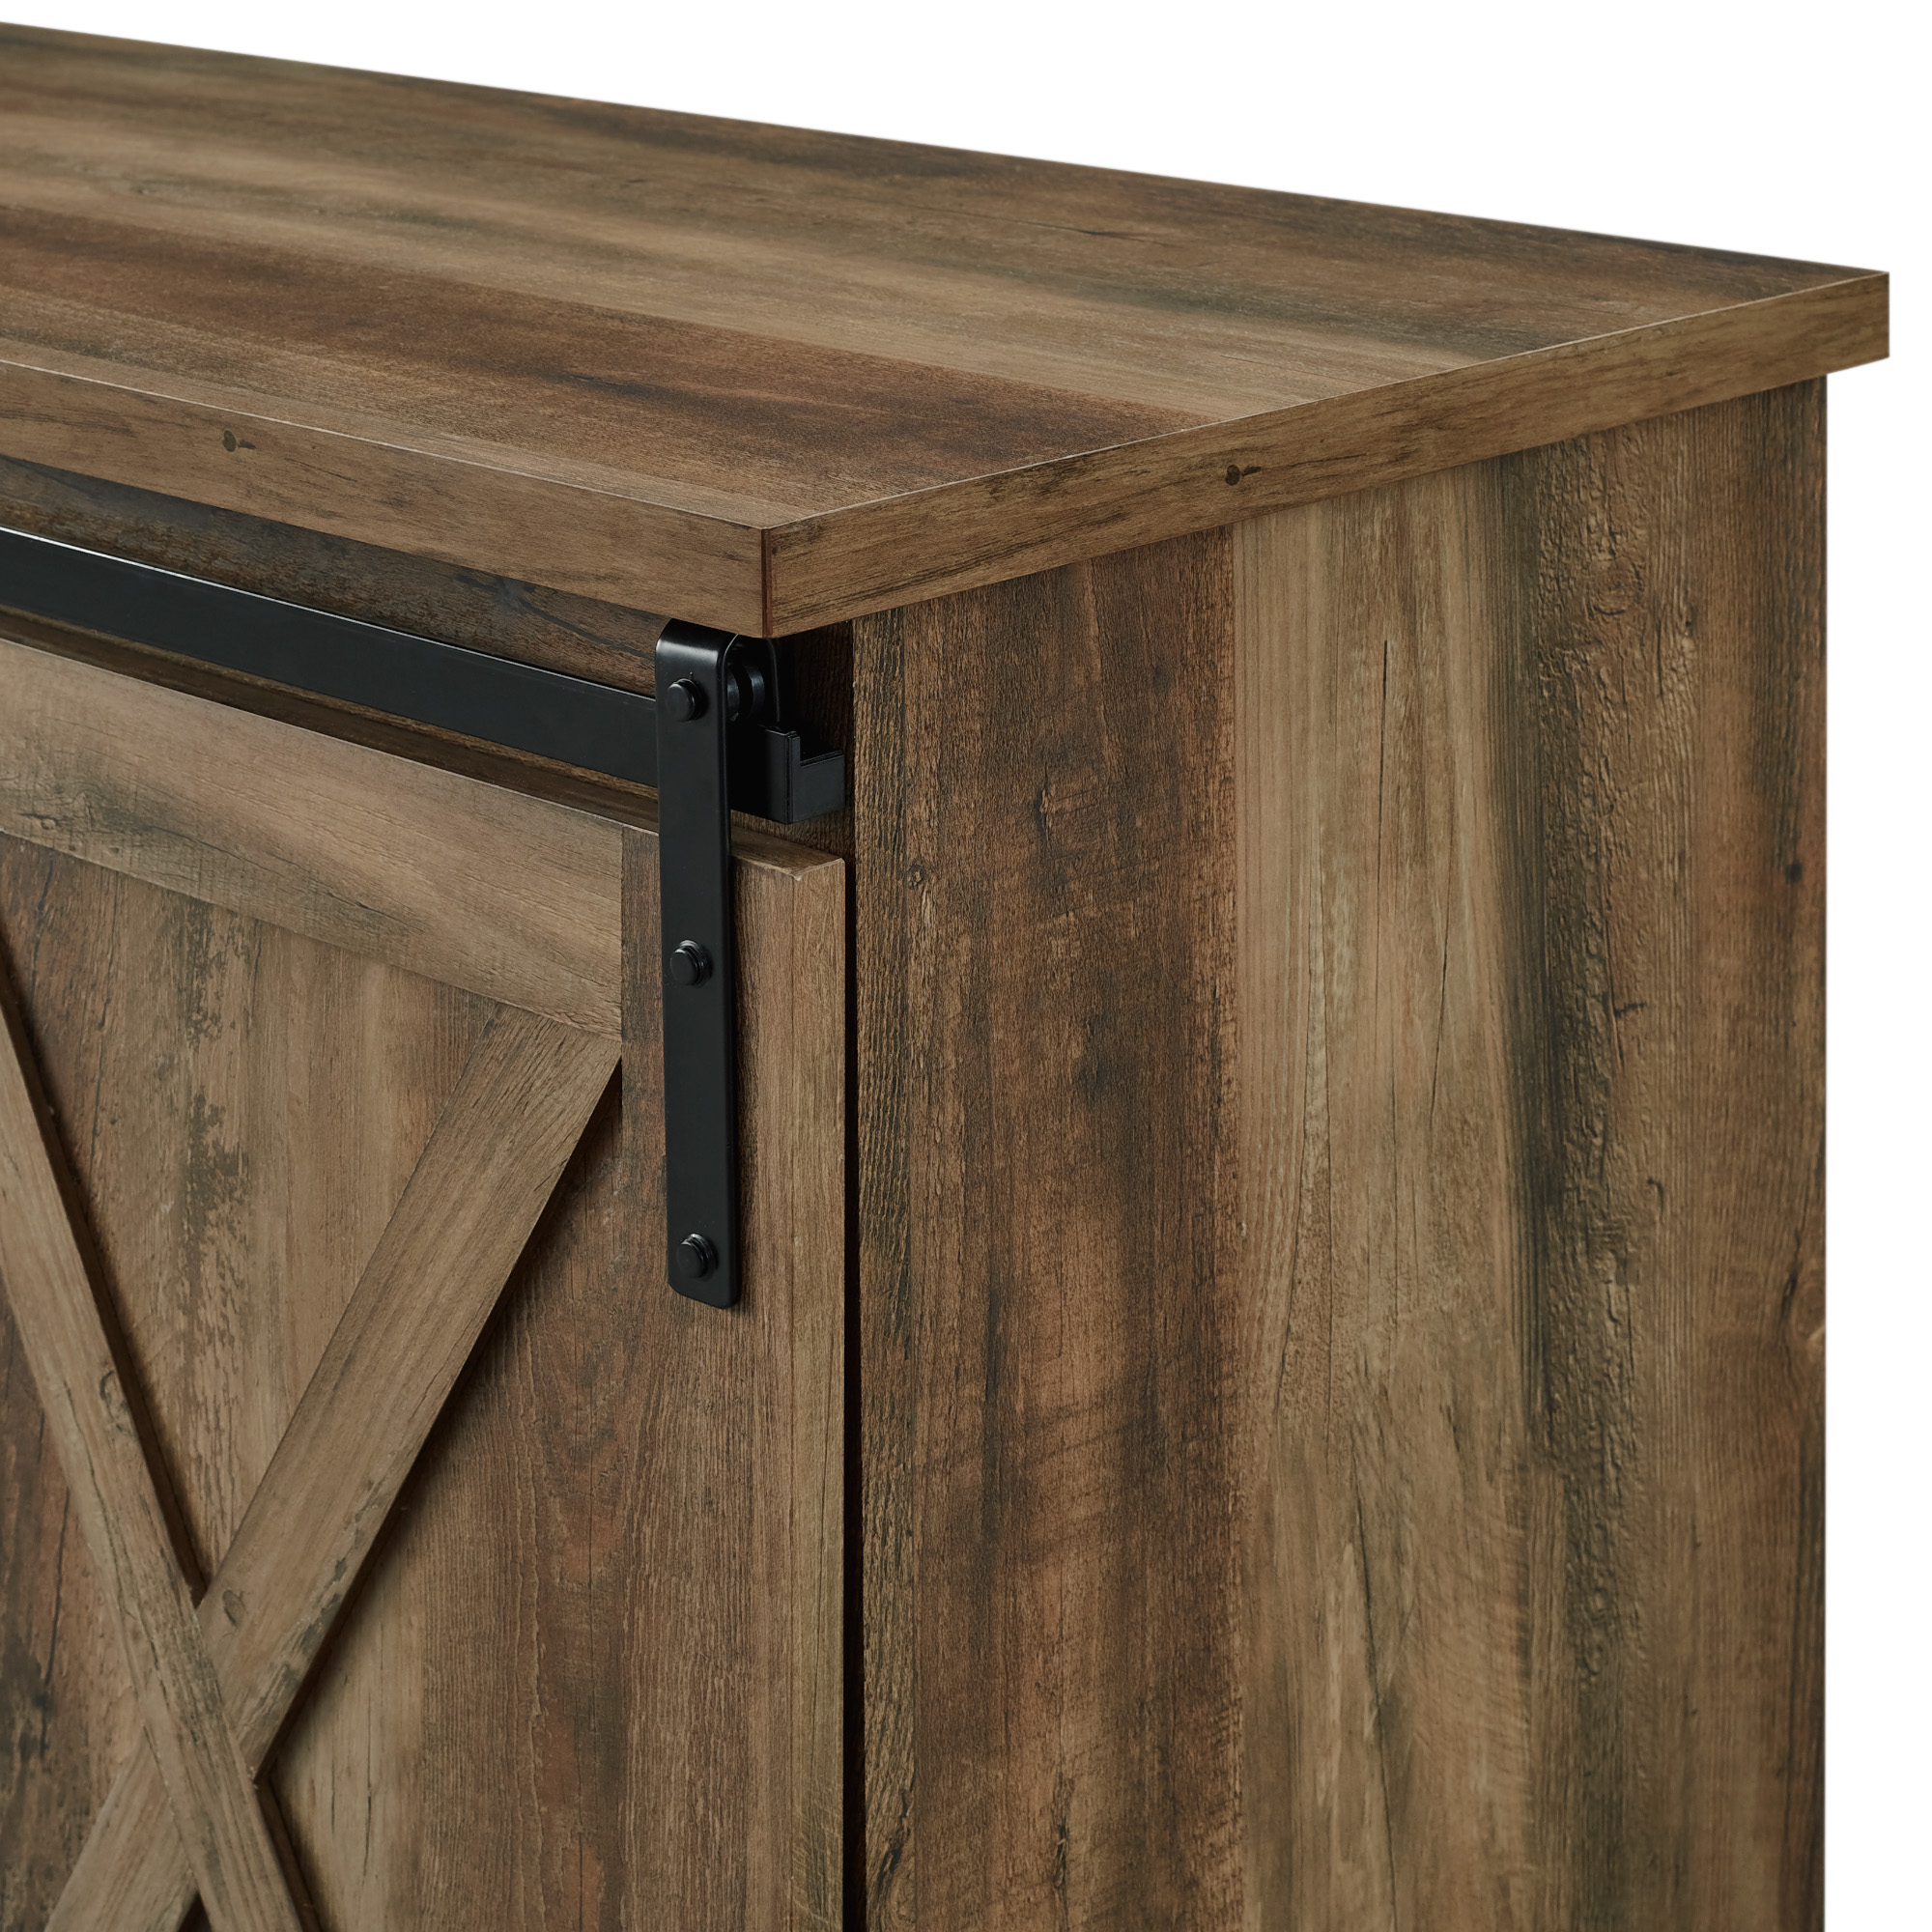 Woven Paths Sliding Farmhouse Barn Door TV Stand for TVs up to 65", Reclaimed Barnwood - image 5 of 11